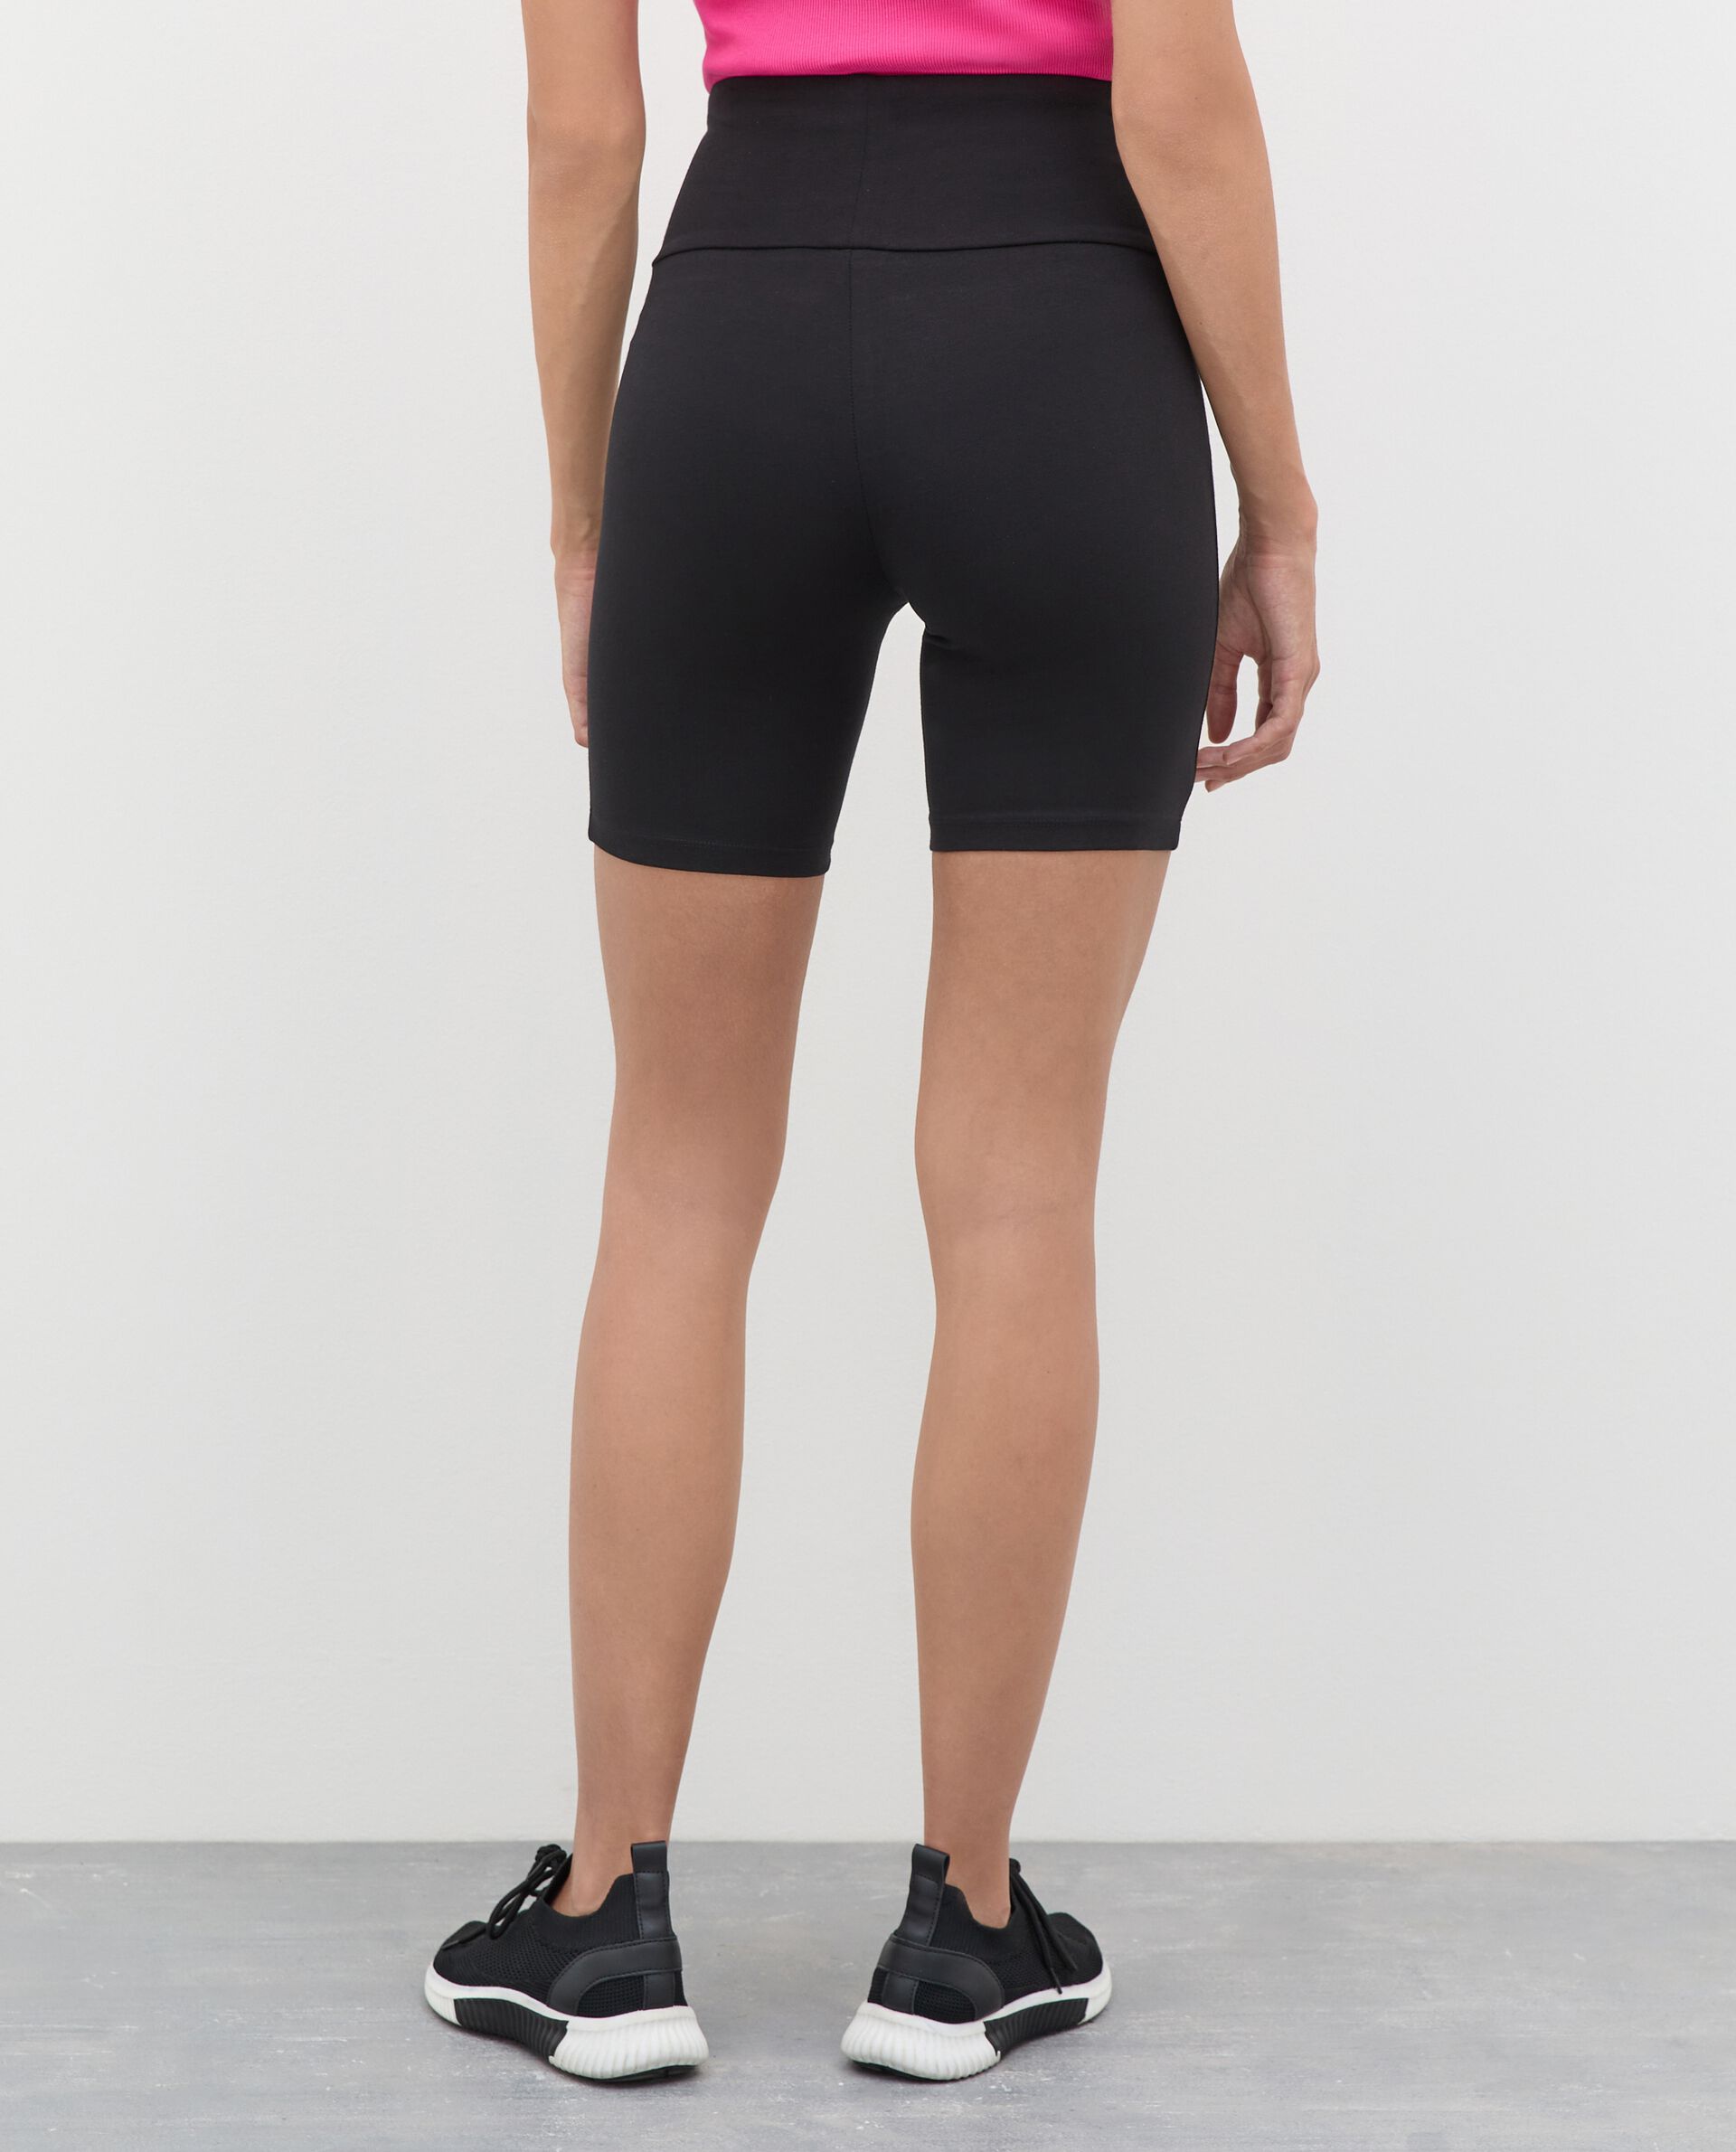 Shorts ciclista Holistic fitness in cotone stretch donna